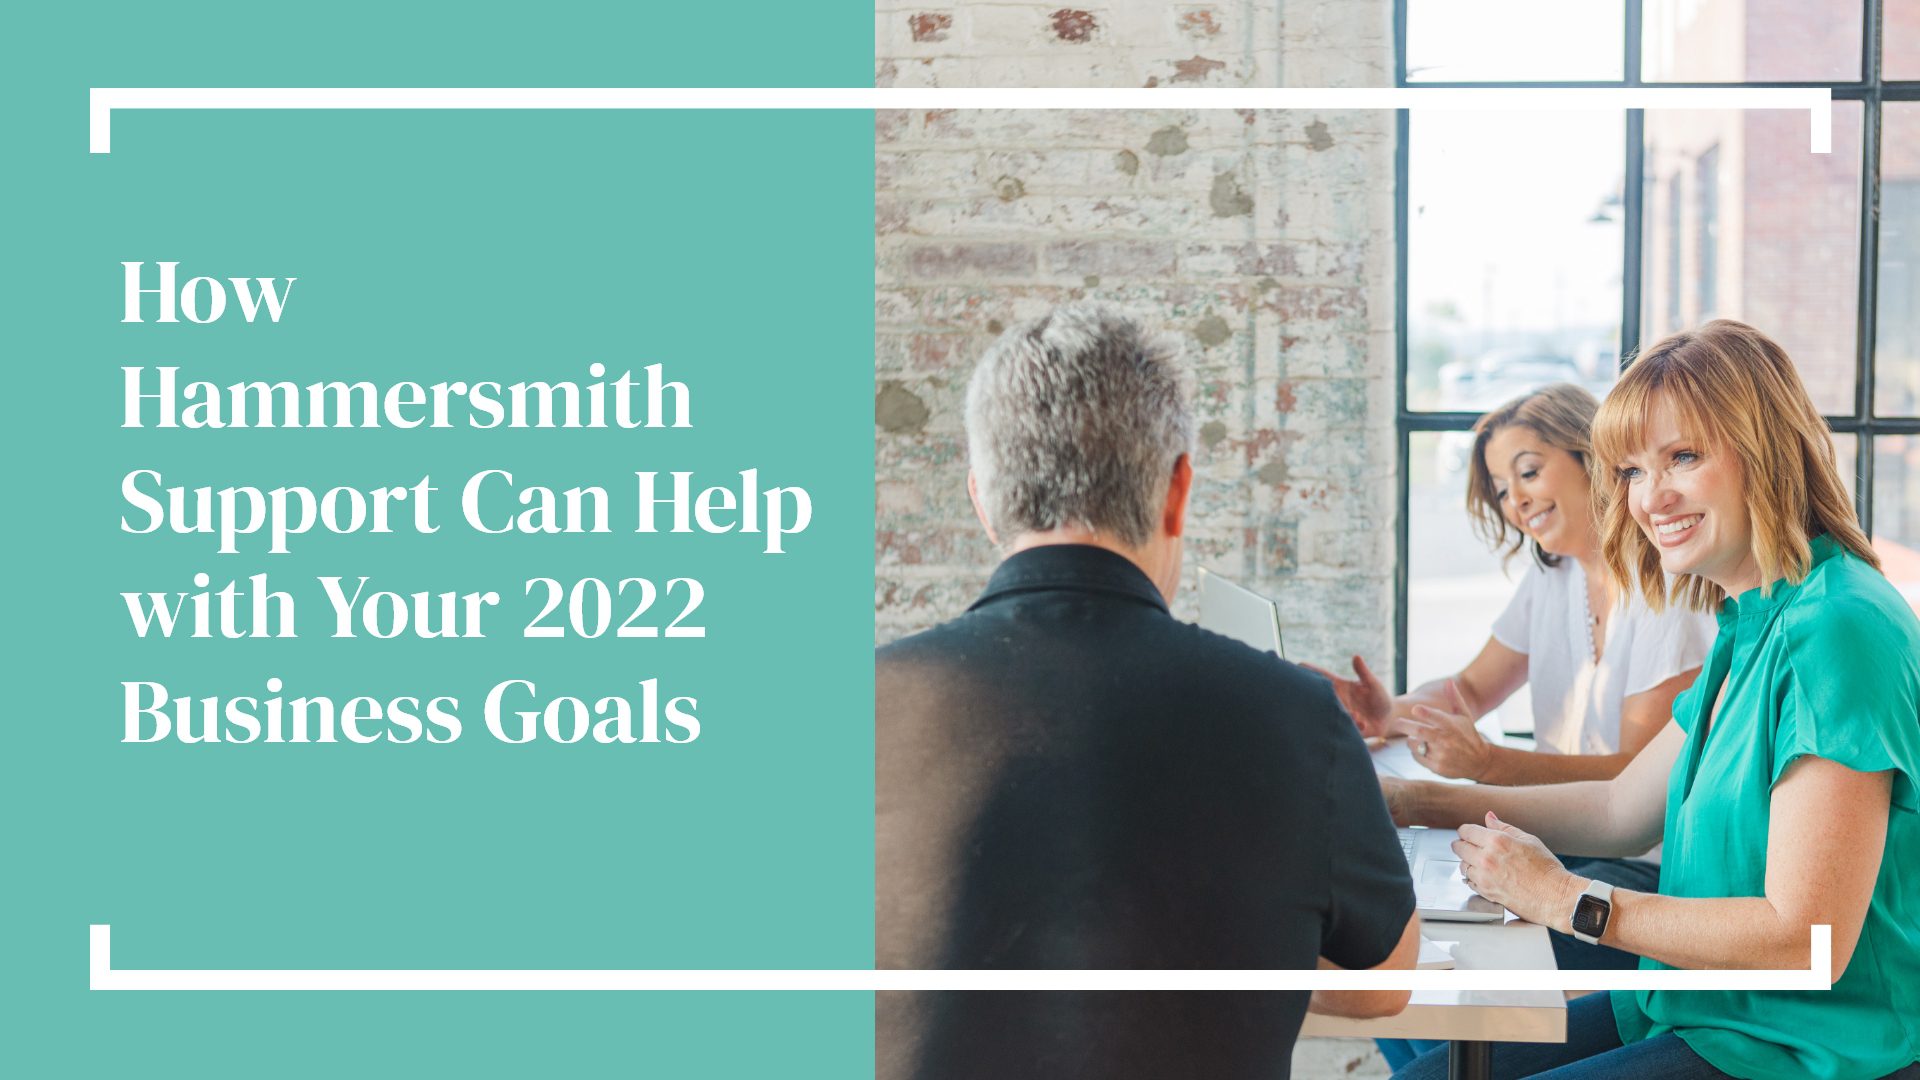 How Hammersmith Support Can Help with Your 2022 Business Goals